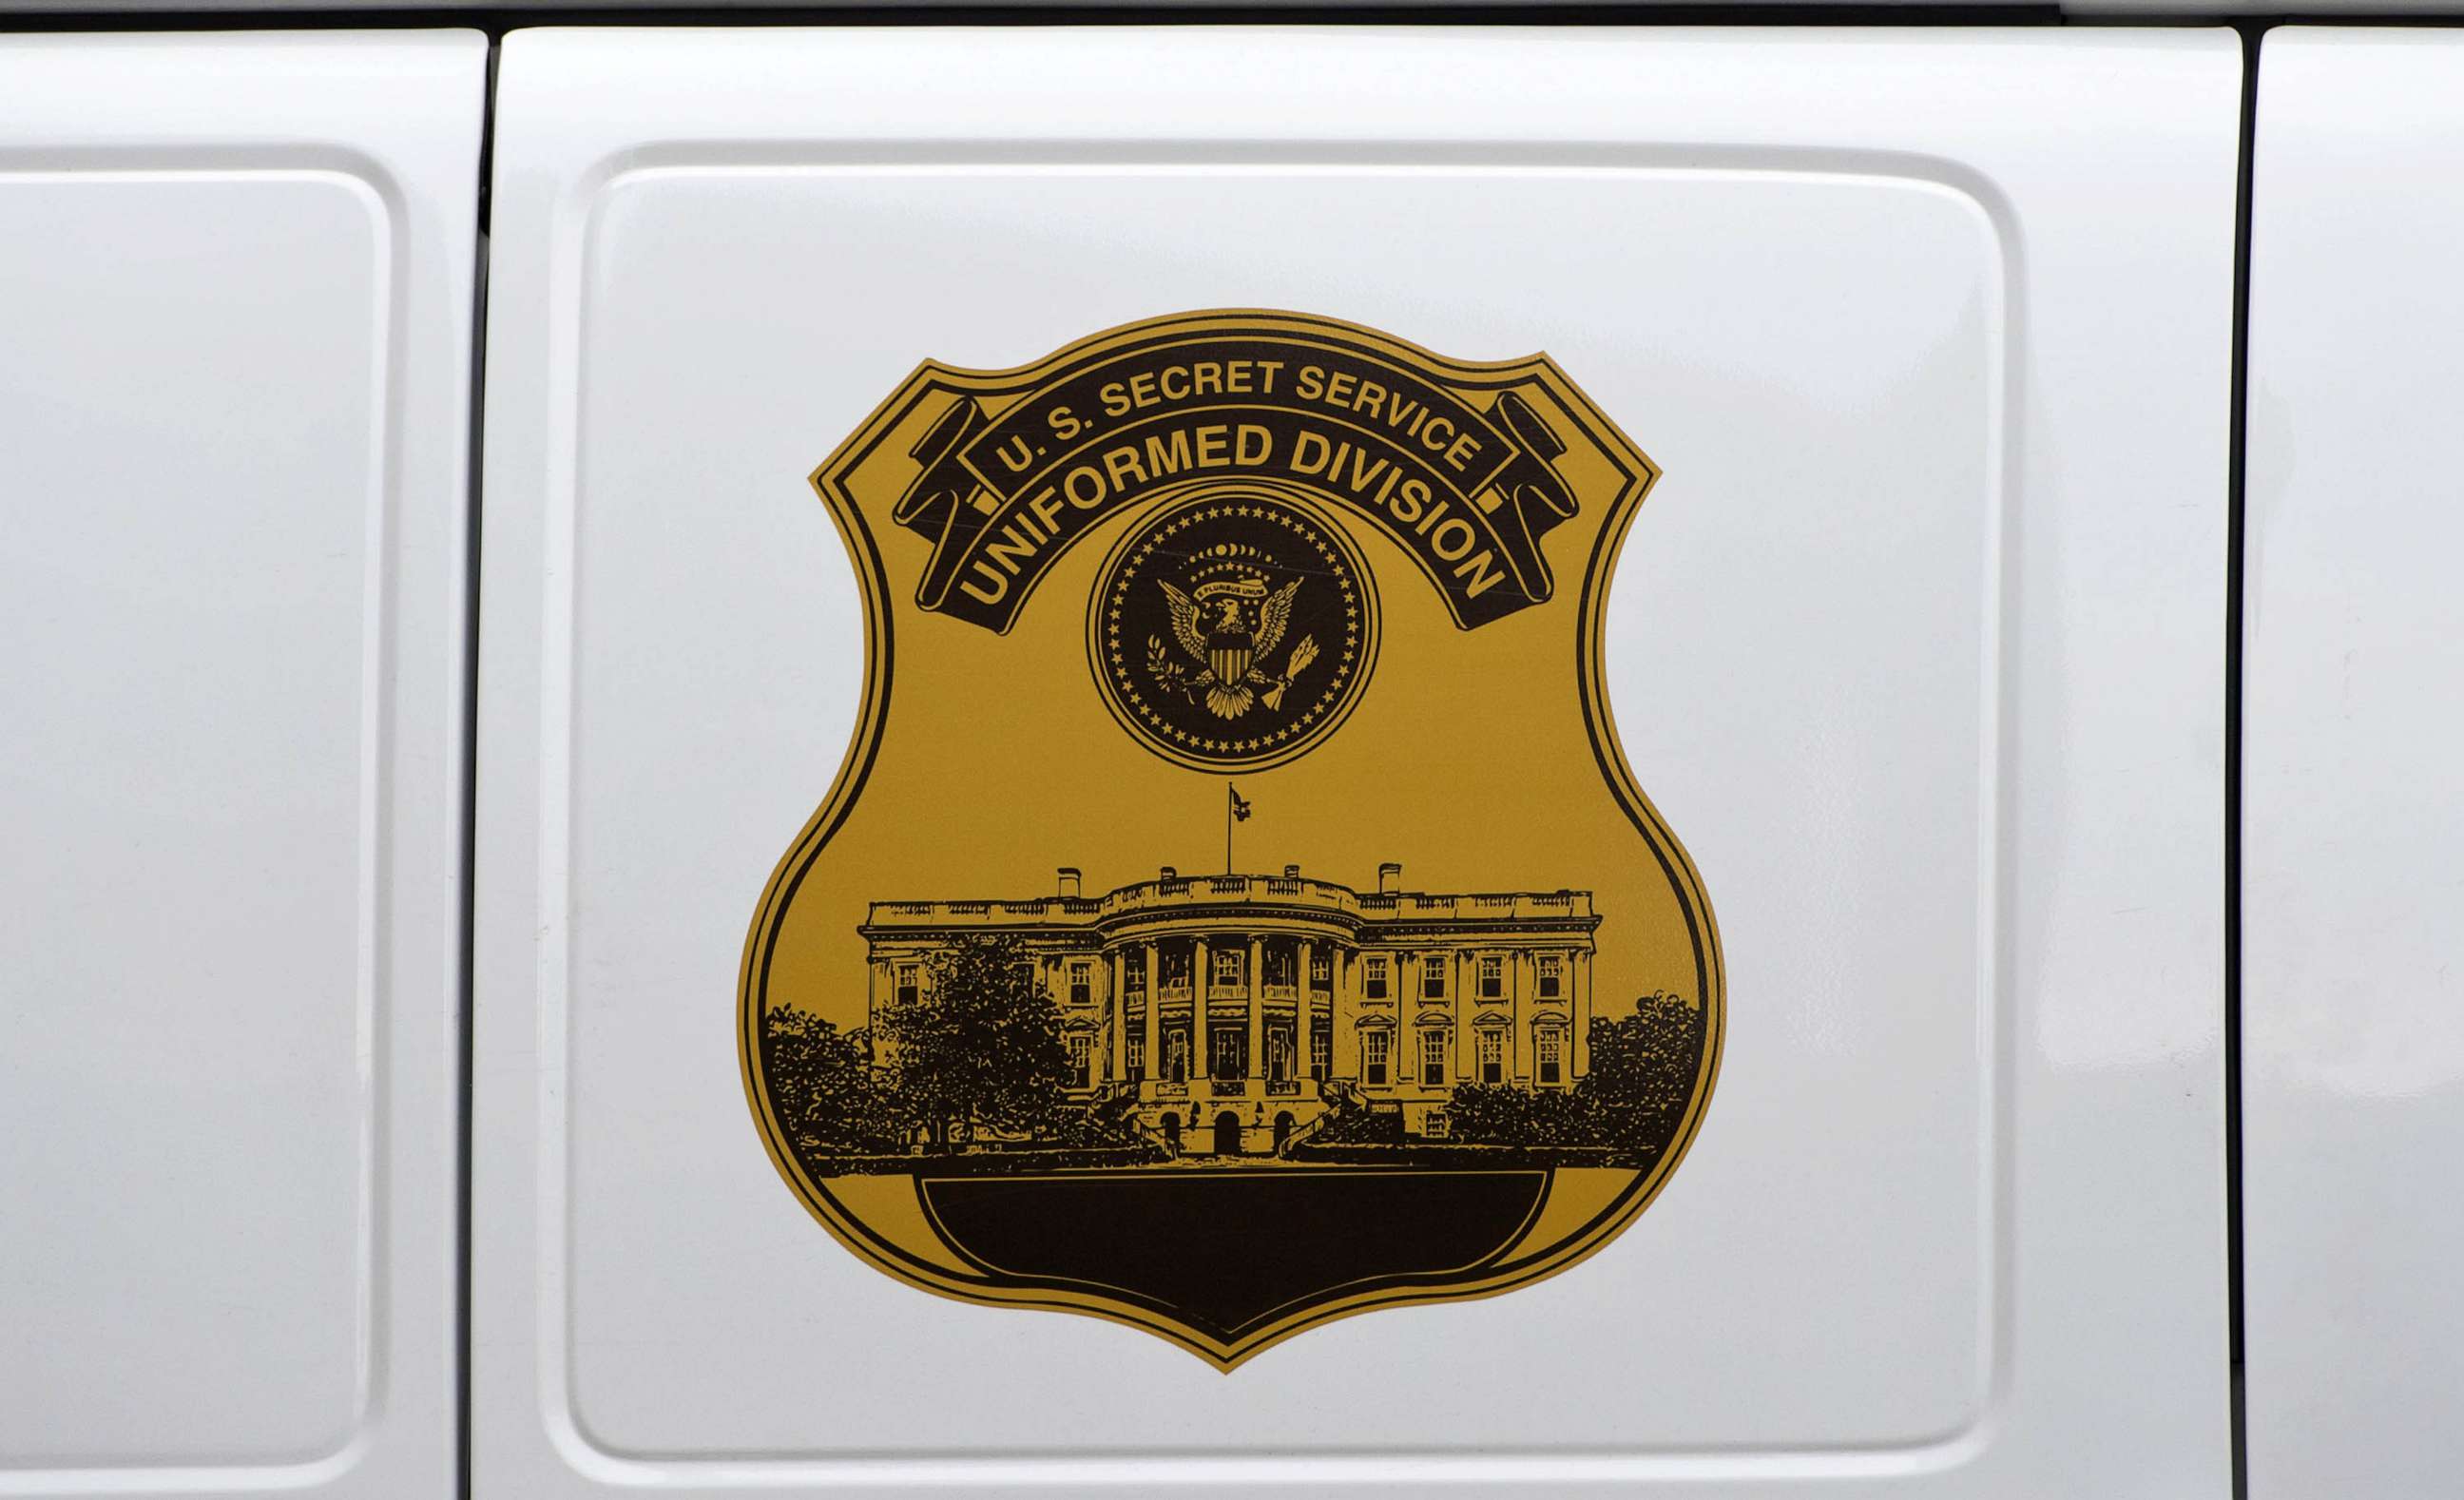 PHOTO: In this Oct. 2, 2014, file photo, the seal of the Secret Service Uniformed Division is seen on the side of a vehicle in Washington, D.C.